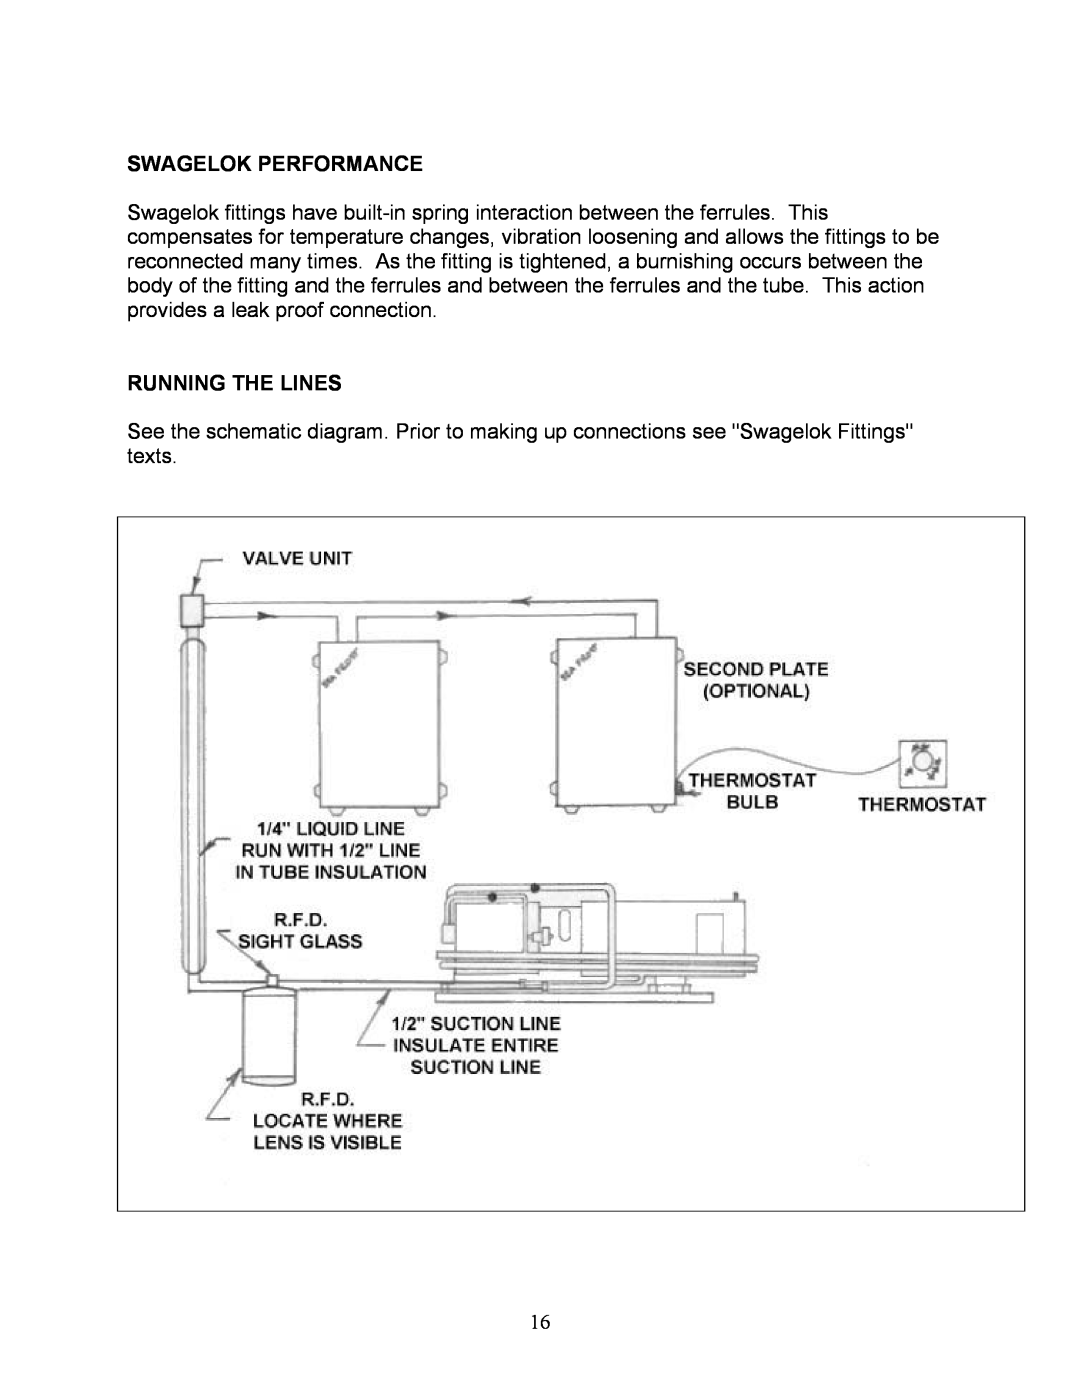 Sea Frost DC 5000 installation instructions Swagelok Performance, Running The Lines 